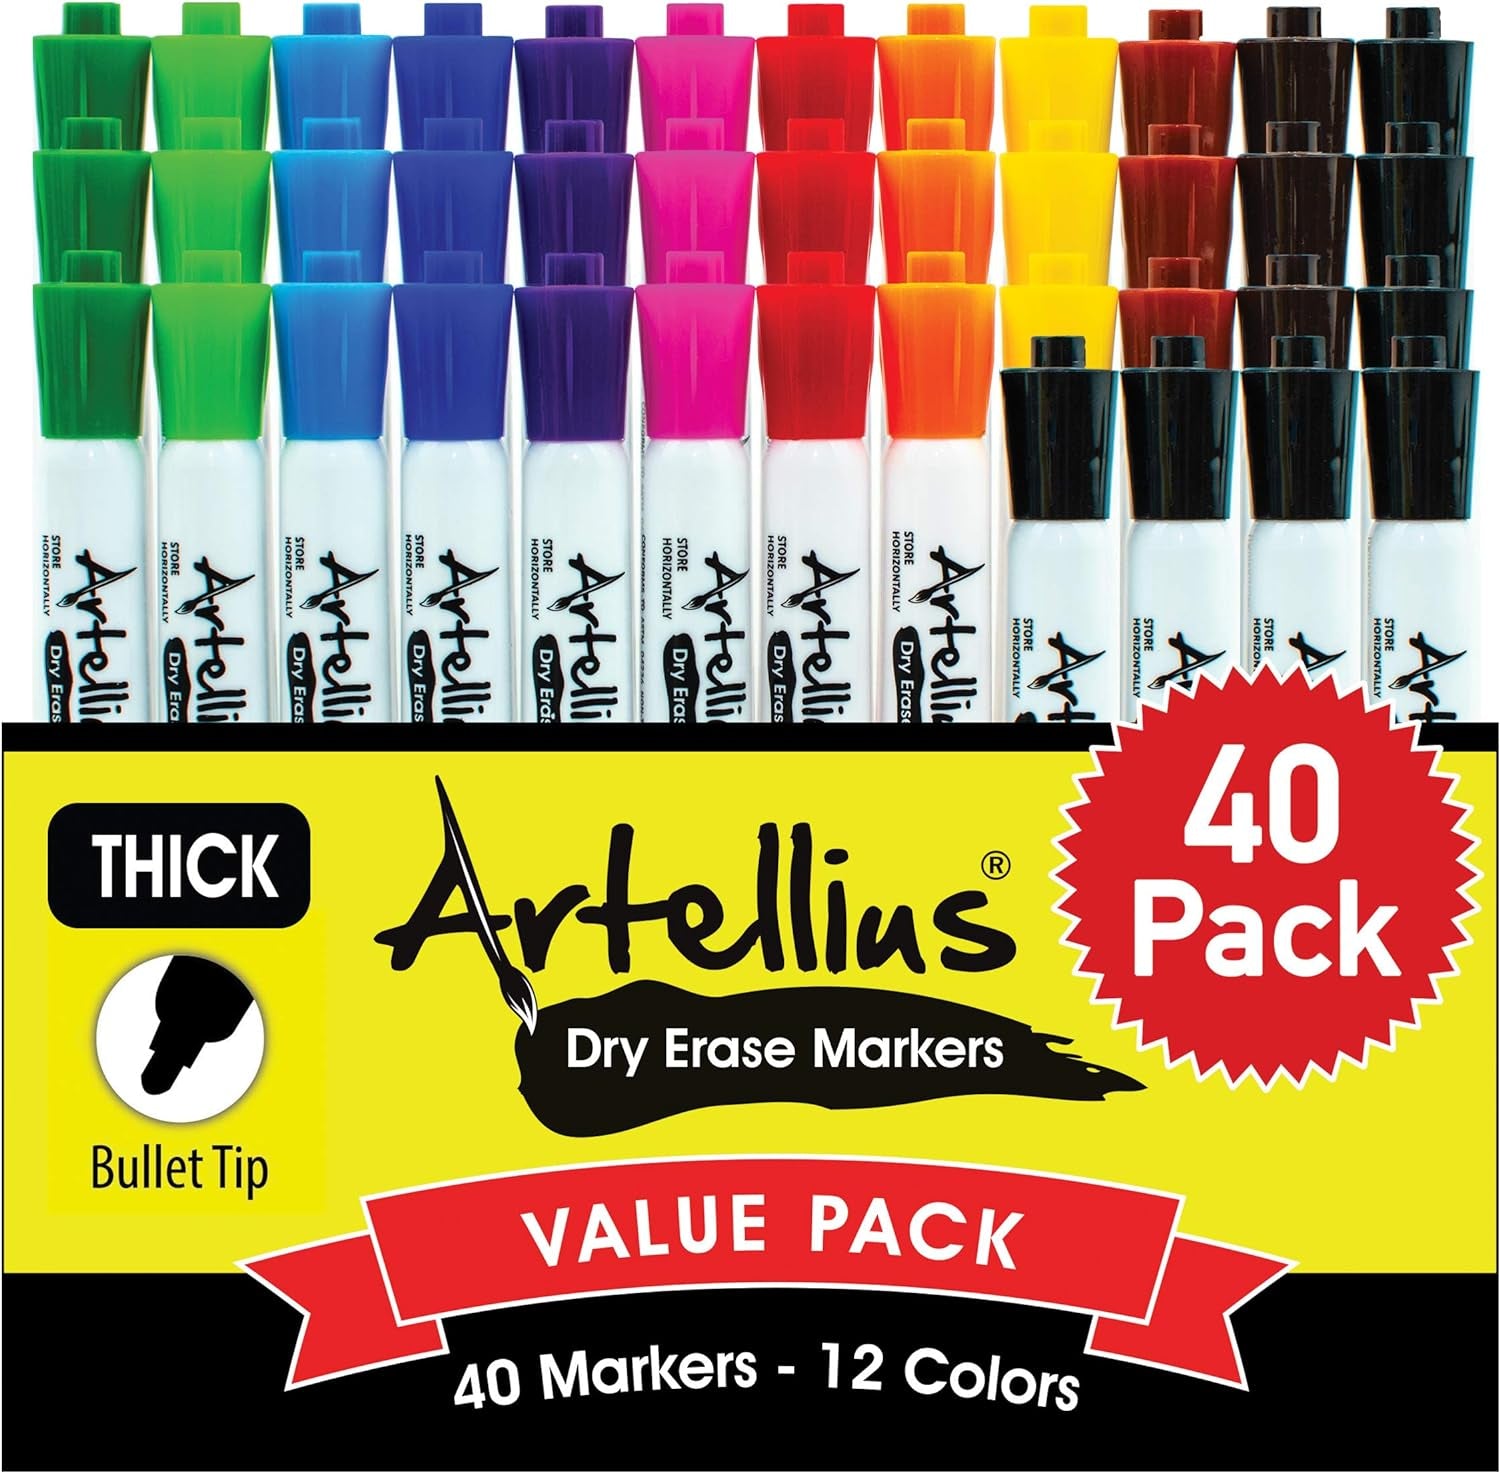 40 Pack of Dry Erase Markers (12 ASSORTED COLORS W/ 7 EXTRA BLACK) - Thick Barrel Design - Perfect Pens for Writing on Whiteboards, Dry-Erase Boards, Mirrors, & All White Board Surfaces